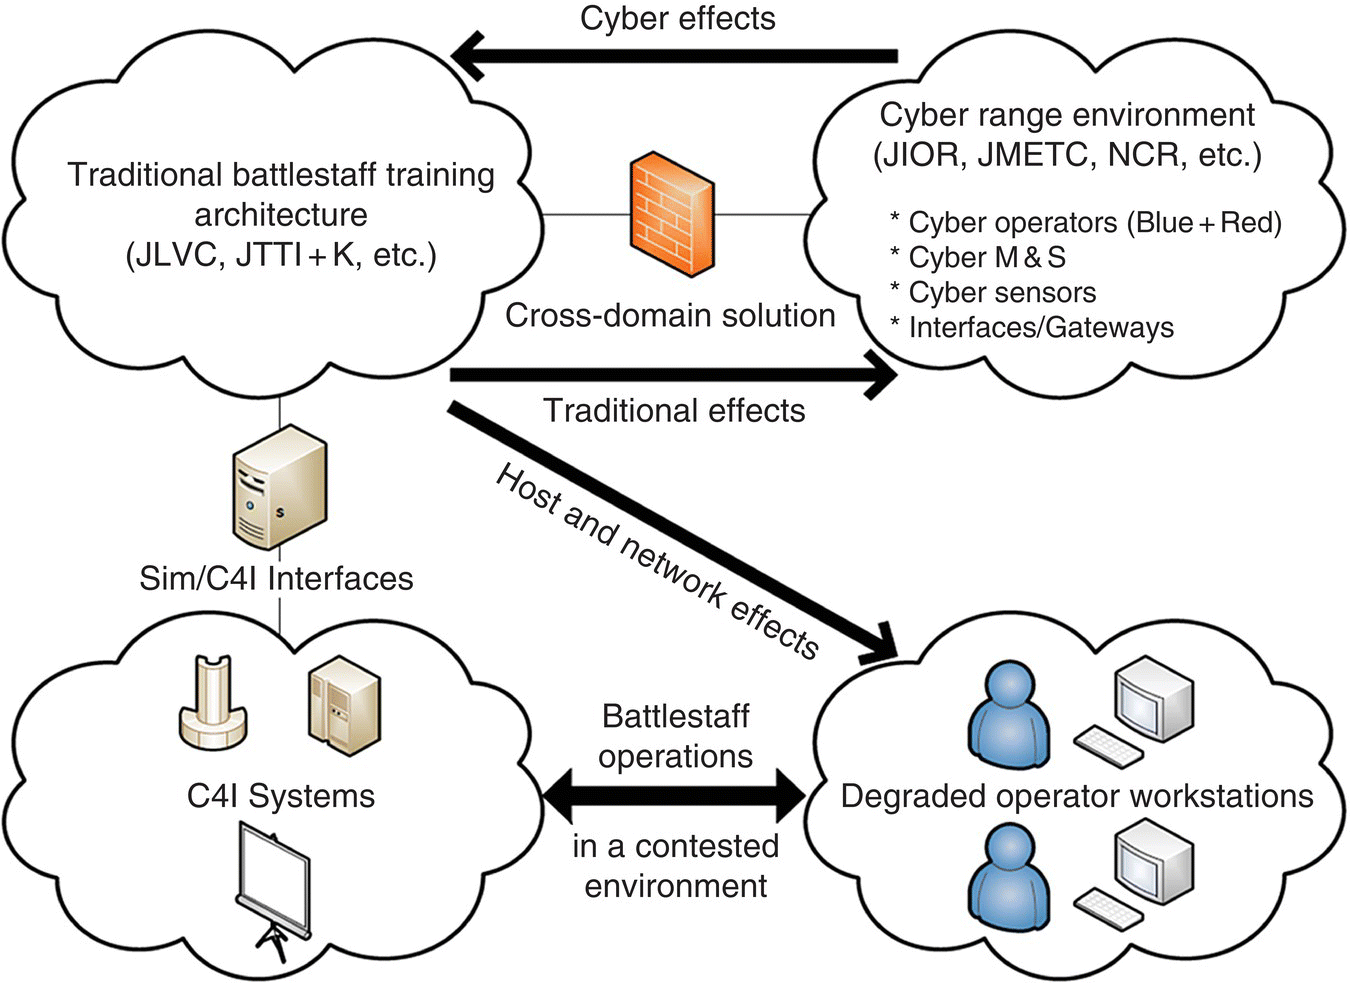 Schematic of COATS cyber injection architecture displaying arrows labeled cyber effects, cross-domain solution, etc., between clouds with bulleted lists and icons for C4I Systems, Degraded operator workstations, etc.